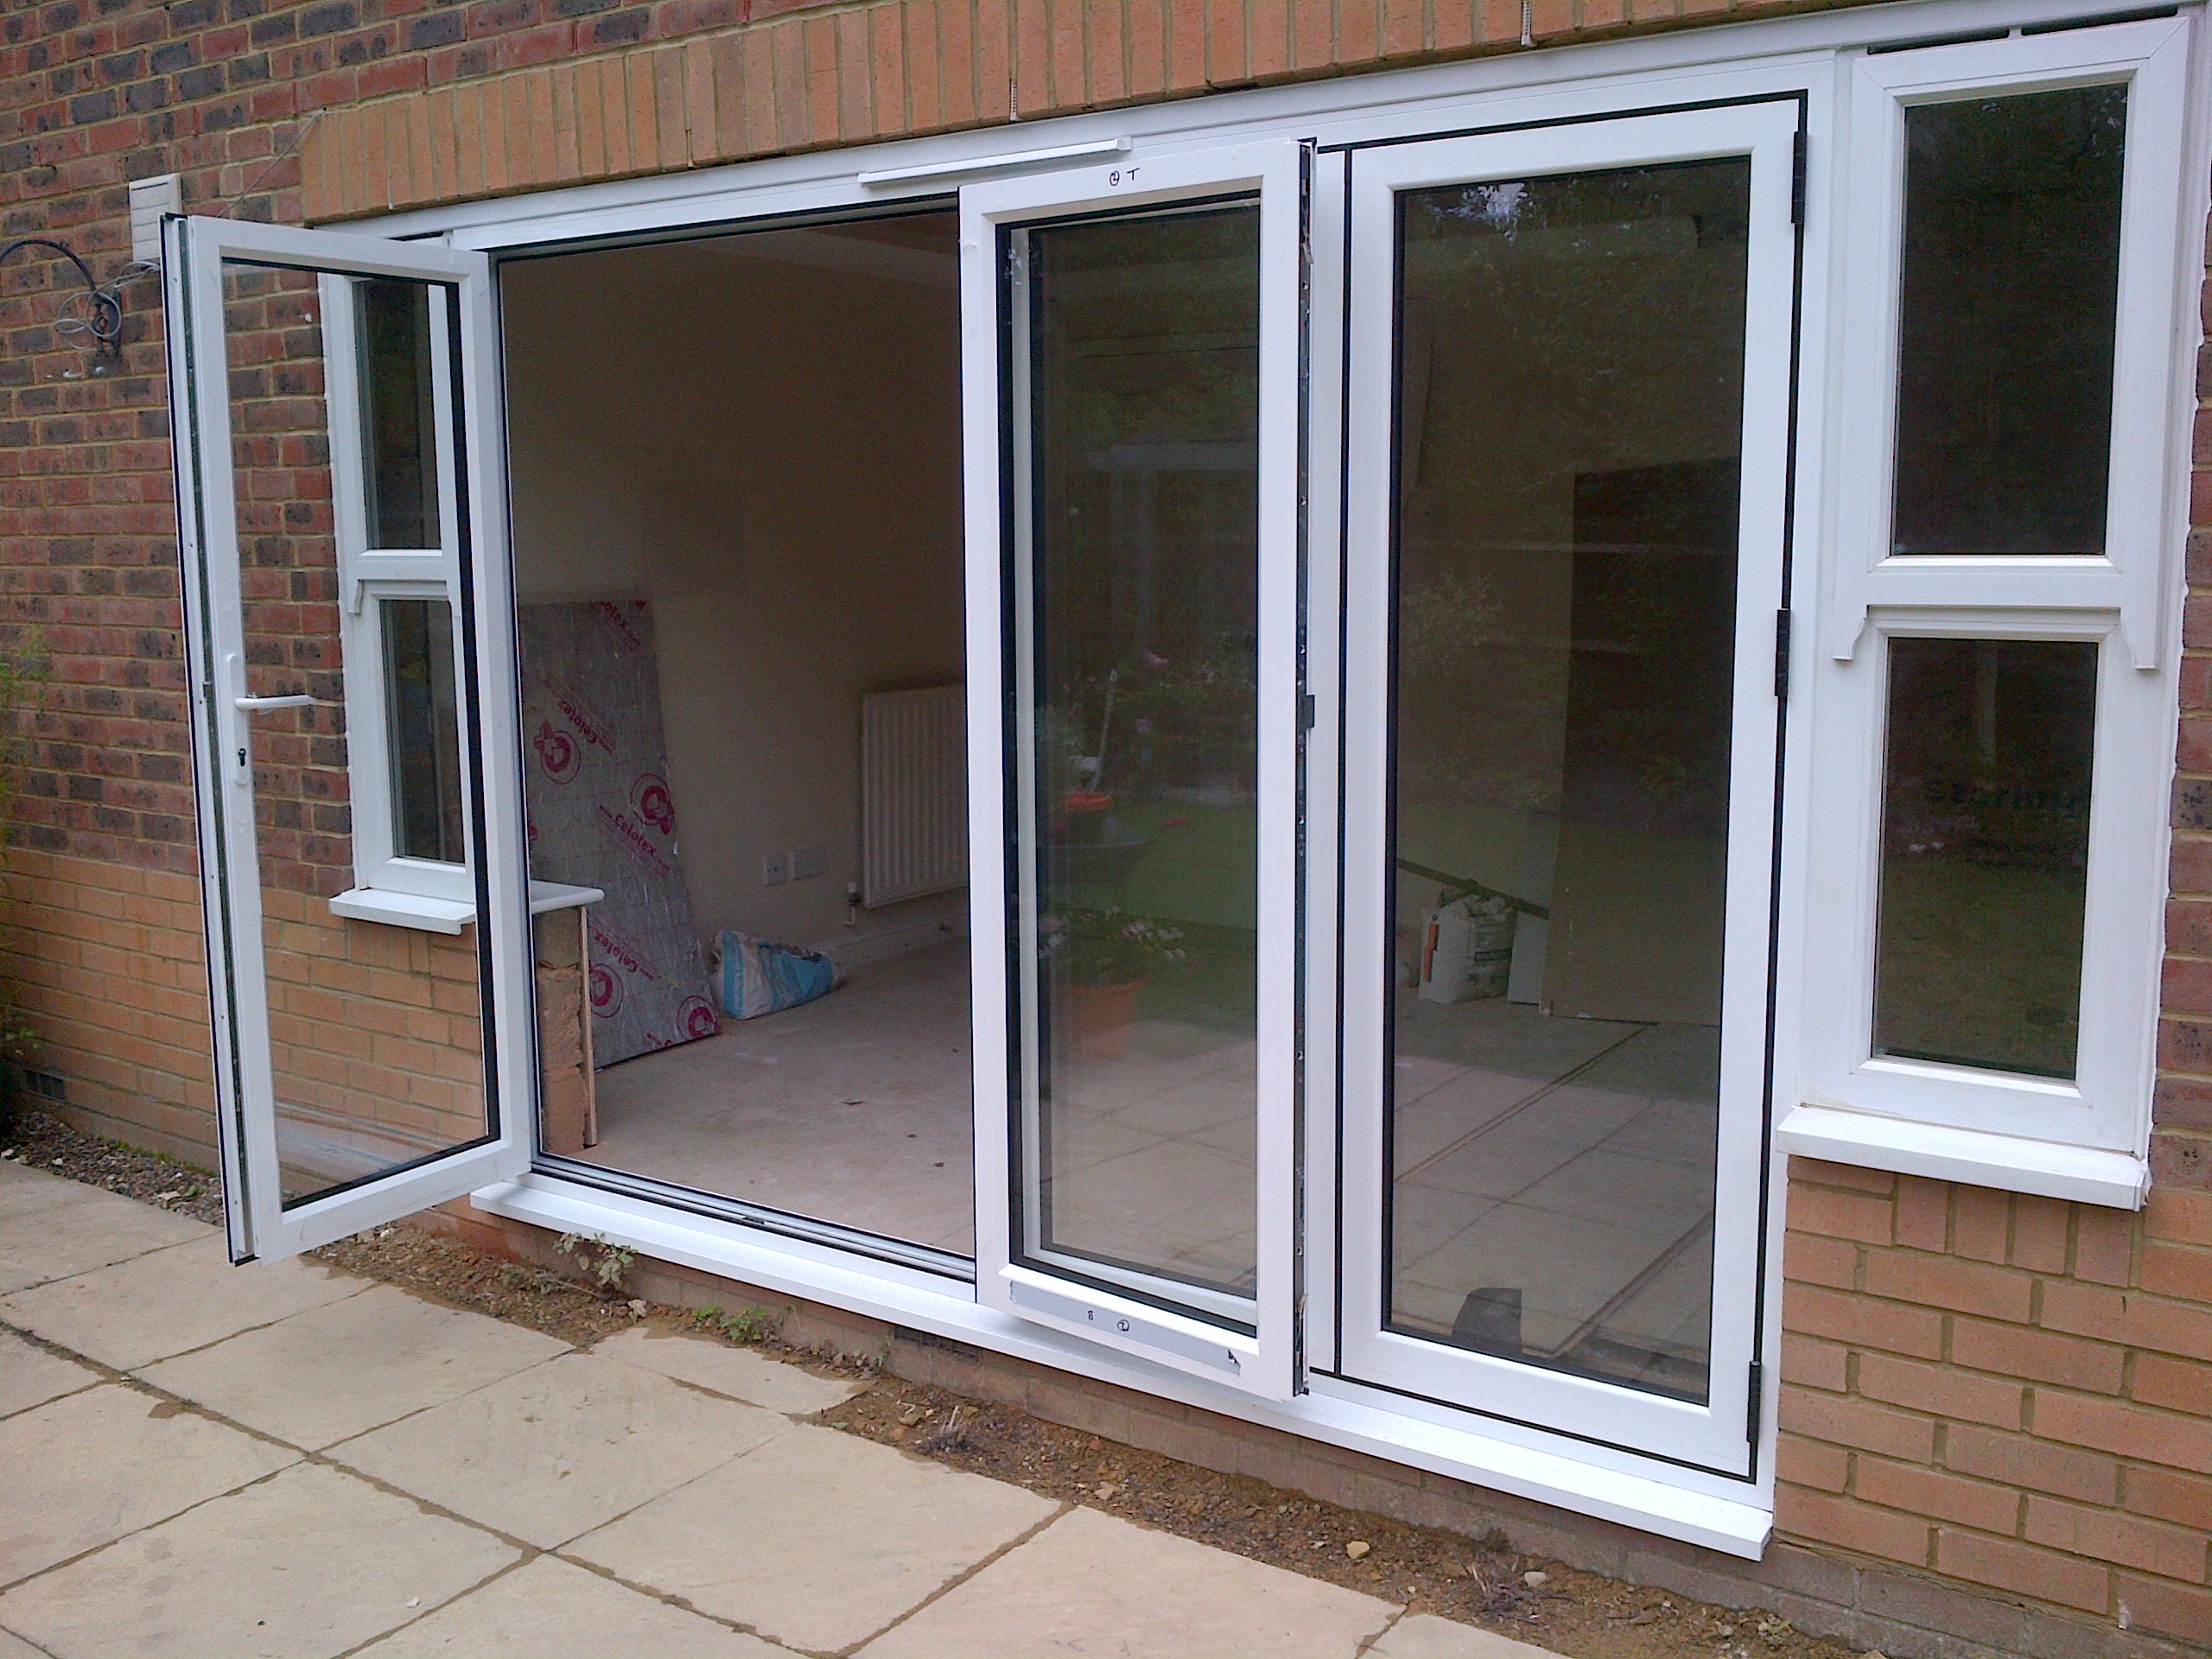 CONCERTINA DOORS, ALUMINIUM BI FOLD DOORS,  bifold door, aluminium doors, ON-LINE PRICING     SPECIAL OFFERS     BUILDERS     DOUBLE GLAZING, Garage Conversions, Conversions Prices,FASCIAS SOFFITS     ORANGERIES, PROPERTY REFURBISHMENTS, DRIVES, PATIO'S, SPECIAL PROJECTS,GALLERY     EXTENSIONS, LANTERNS     ROOFING Quote     BI-FOLDS     MAINTENANCE QUOTE     DECORATING QUOTE     KITCHENS BATHROOMS     RECOMMENDATIONS     JOBS     PLUMBING HEATING     QUOTE FOR CARPENTRY     South Yorks Division     Links  QUOTATIONS ONLINE FARNHAM ASCOT ODIHAM FLEET FARNBOROUGH BASINGSTOKE CAMBERLEY WOKING READING WINNERSH LISS FARNHAM  QUOTATIONS FOR HOME IMPROVEMENTS, ODIHAM, FLEET, FARNBOROUGH, BASINGSTOKE, CAMBERLEY, WOKING, READING,EXTENSIONS